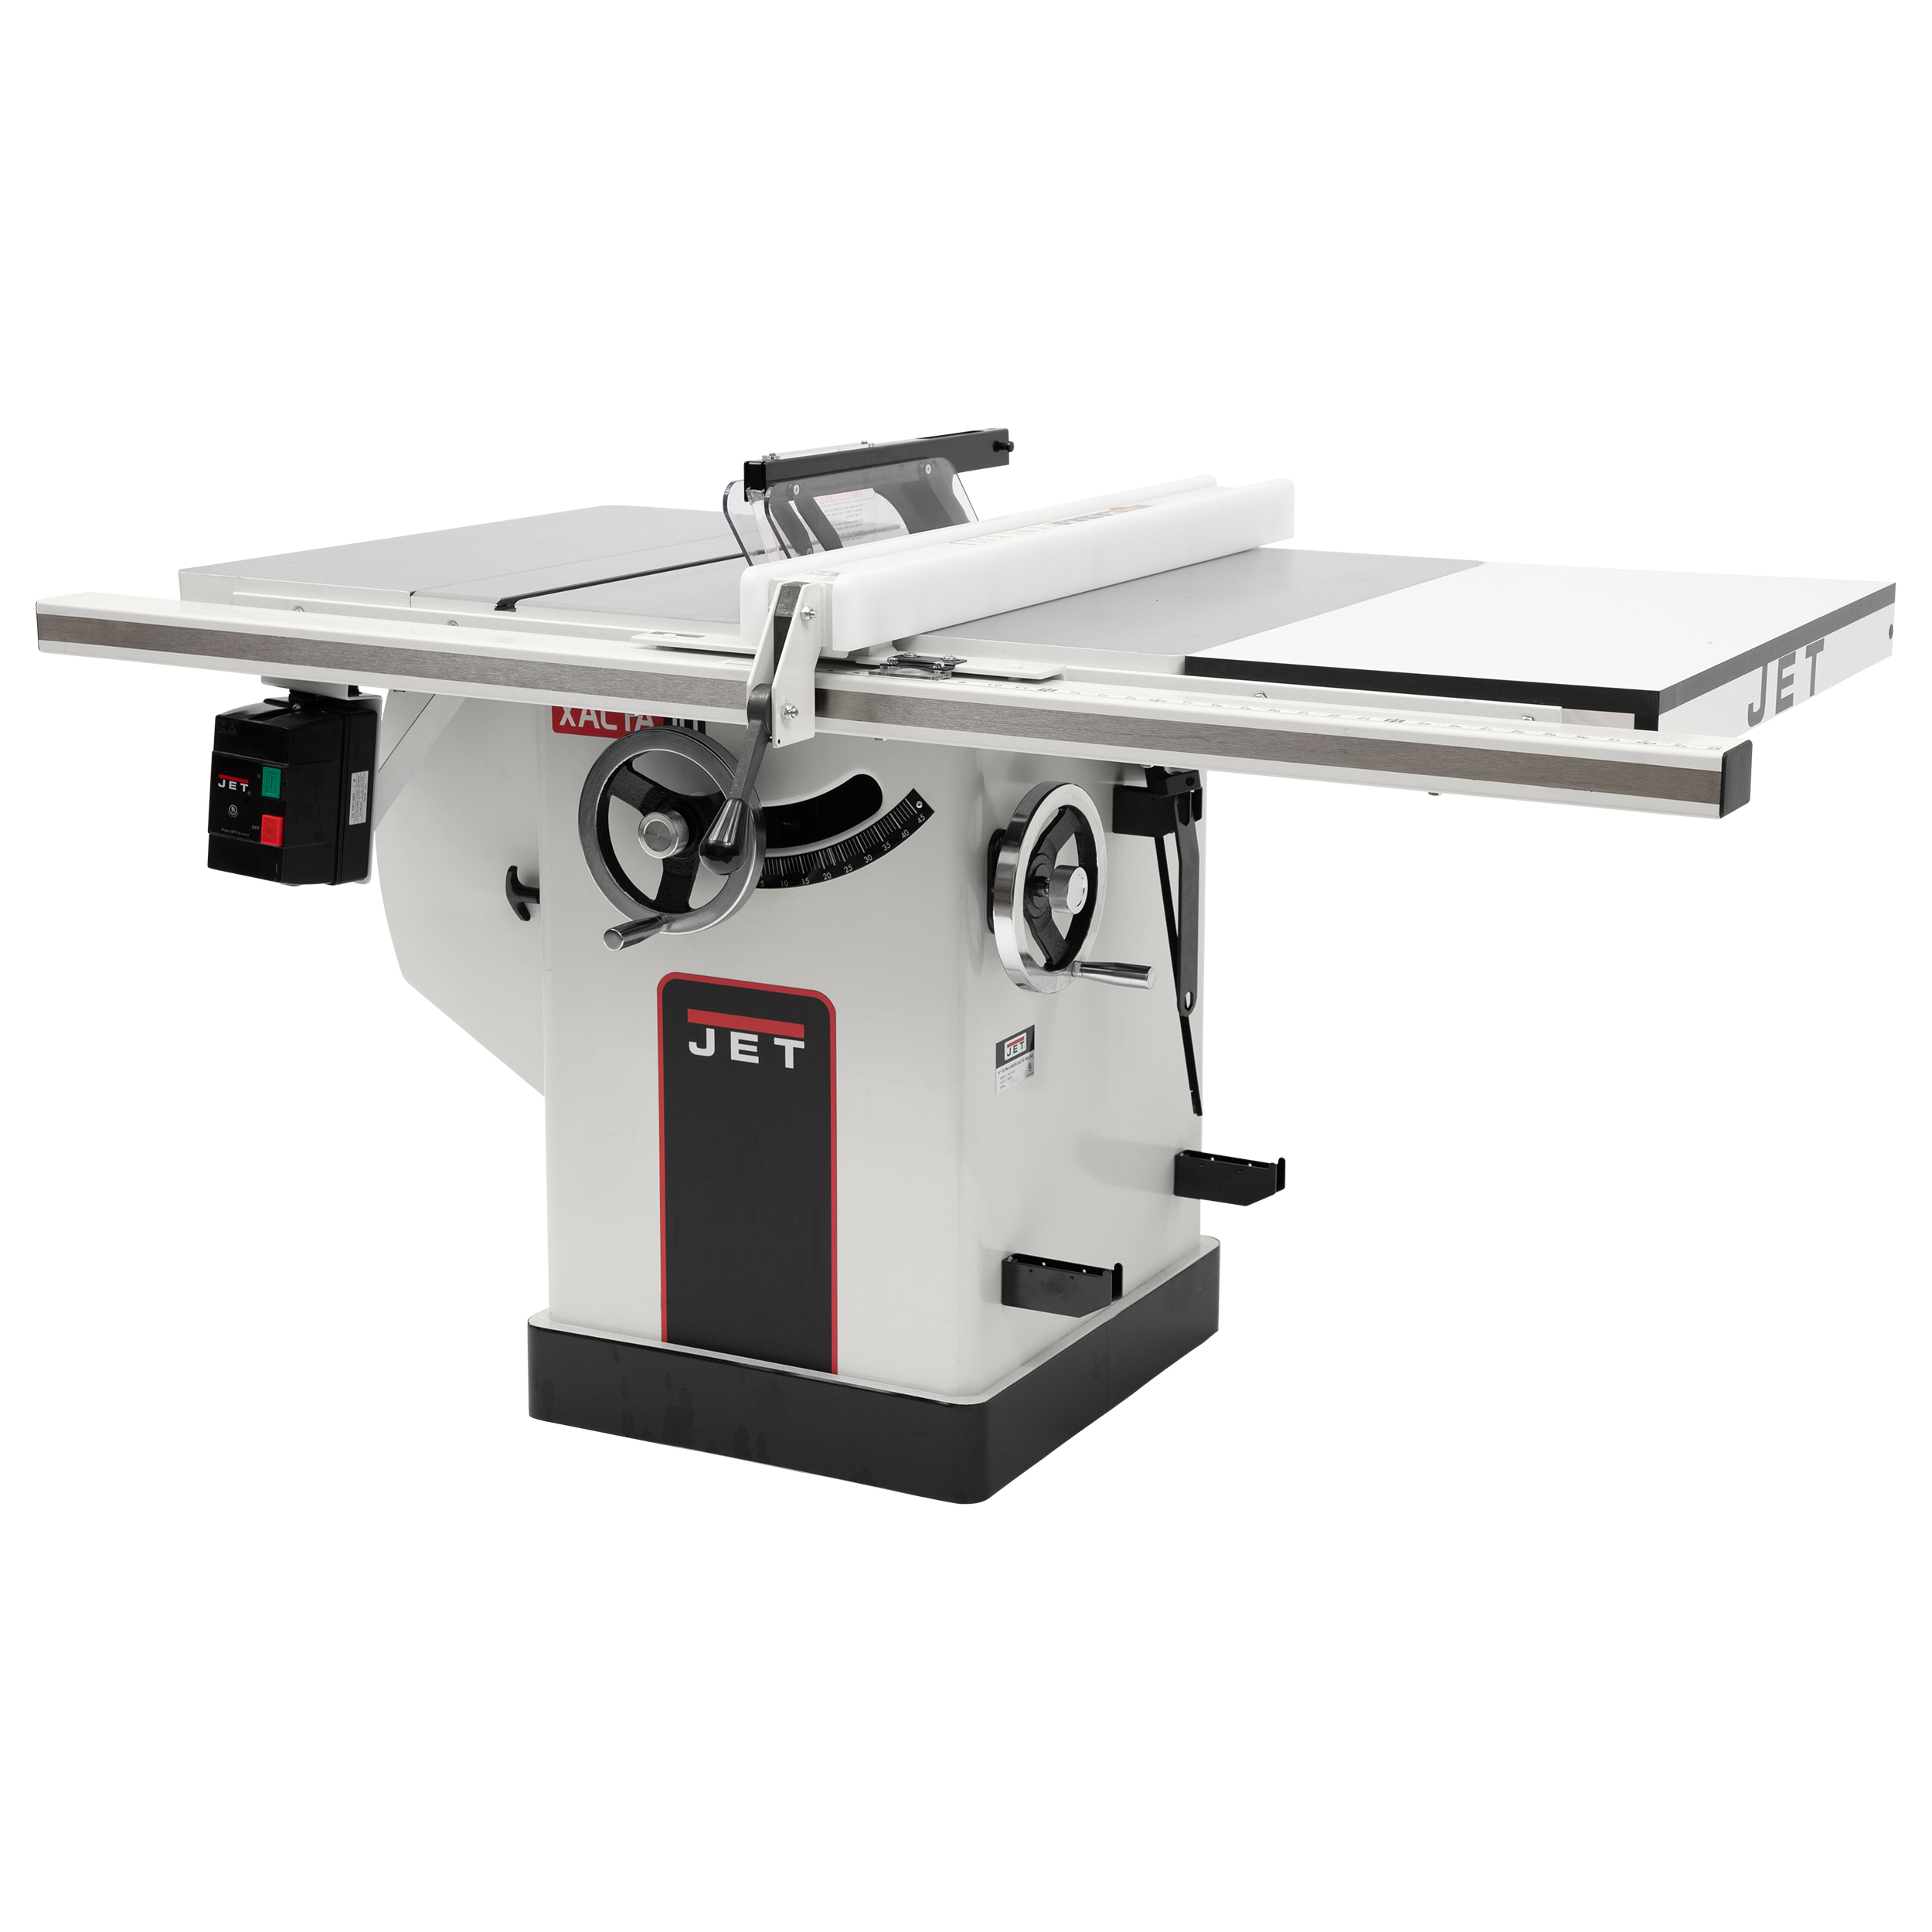 3HP 1PH 230V XACTASAW Deluxe Table Saw with 30